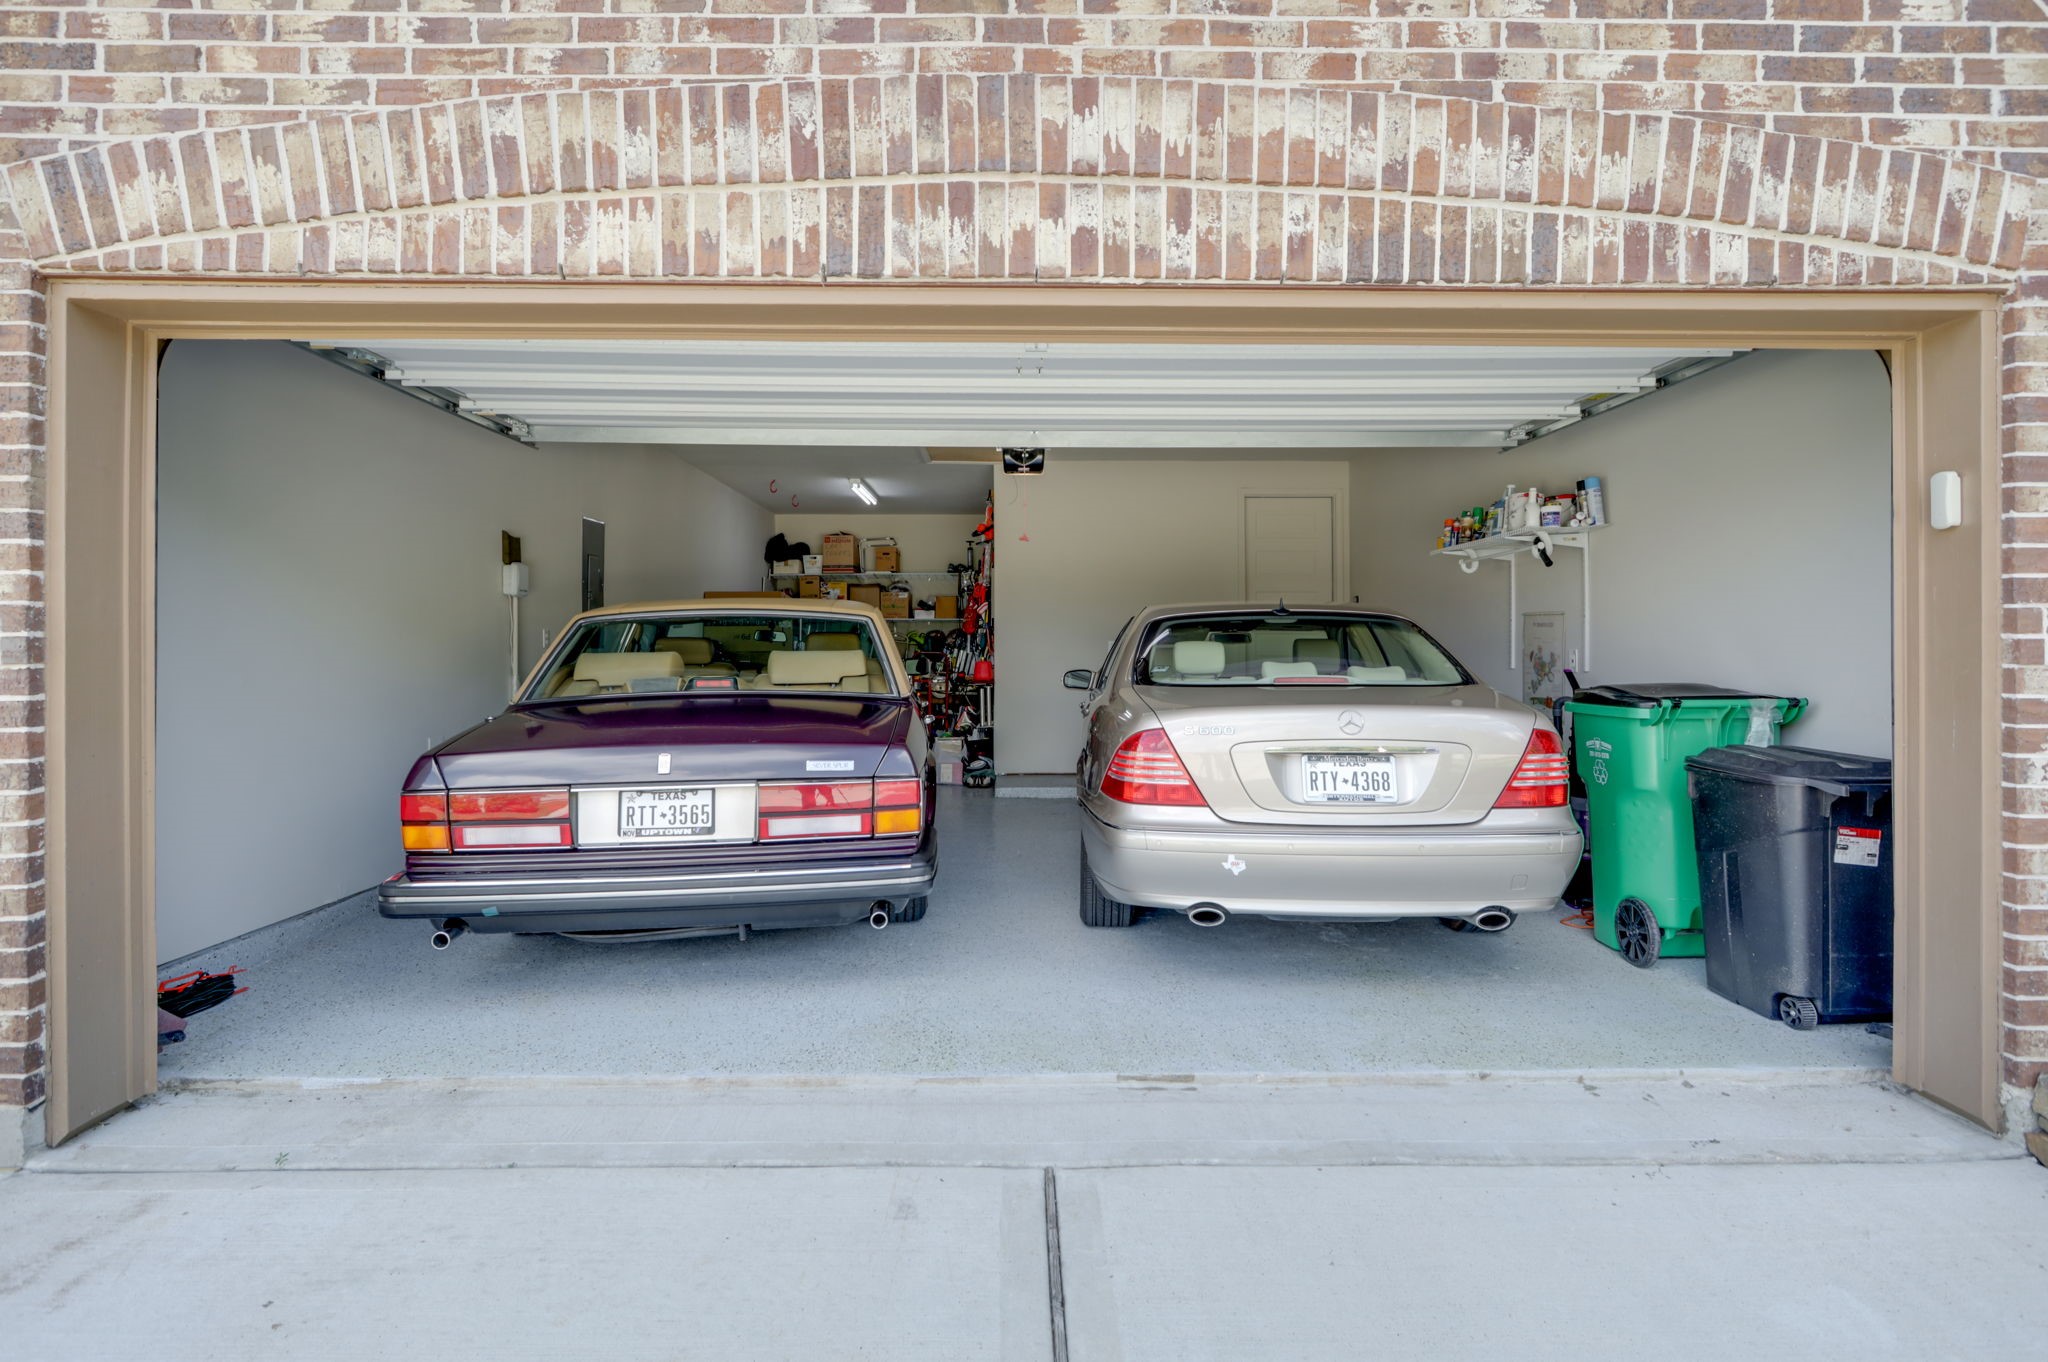 Garage fits three cars (left, in-line).